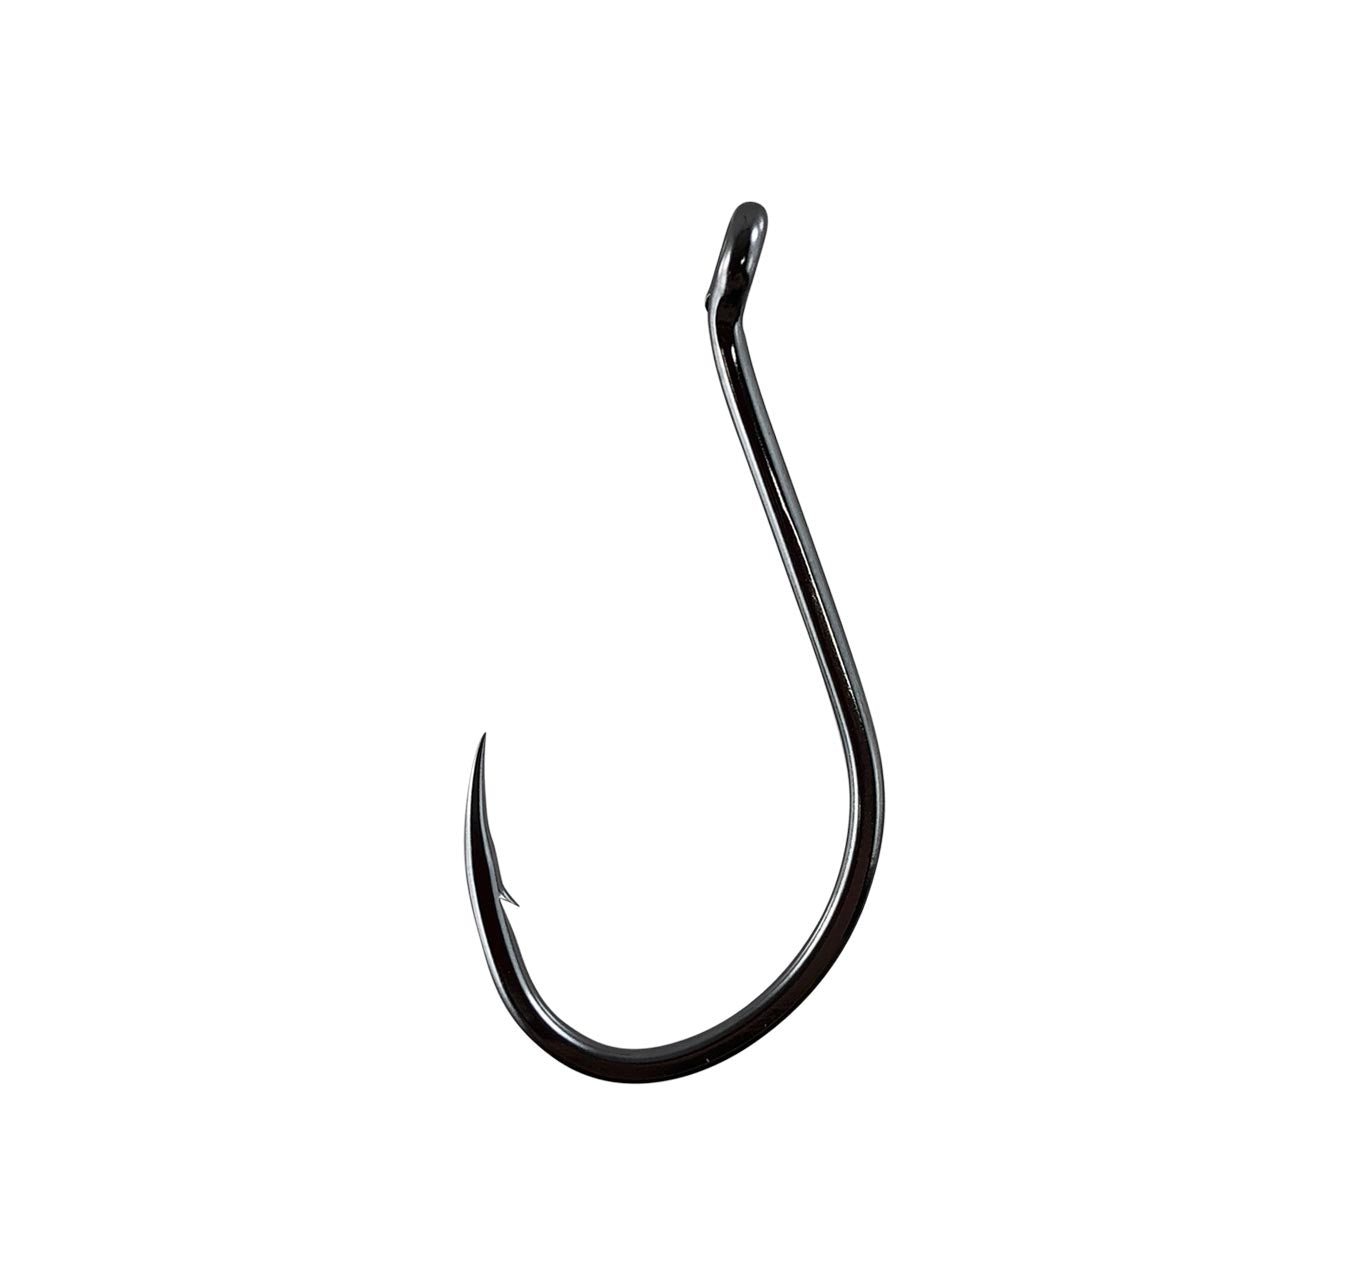 Bream Octopus/Circle Hook Fishing Hooks for sale, Shop with Afterpay